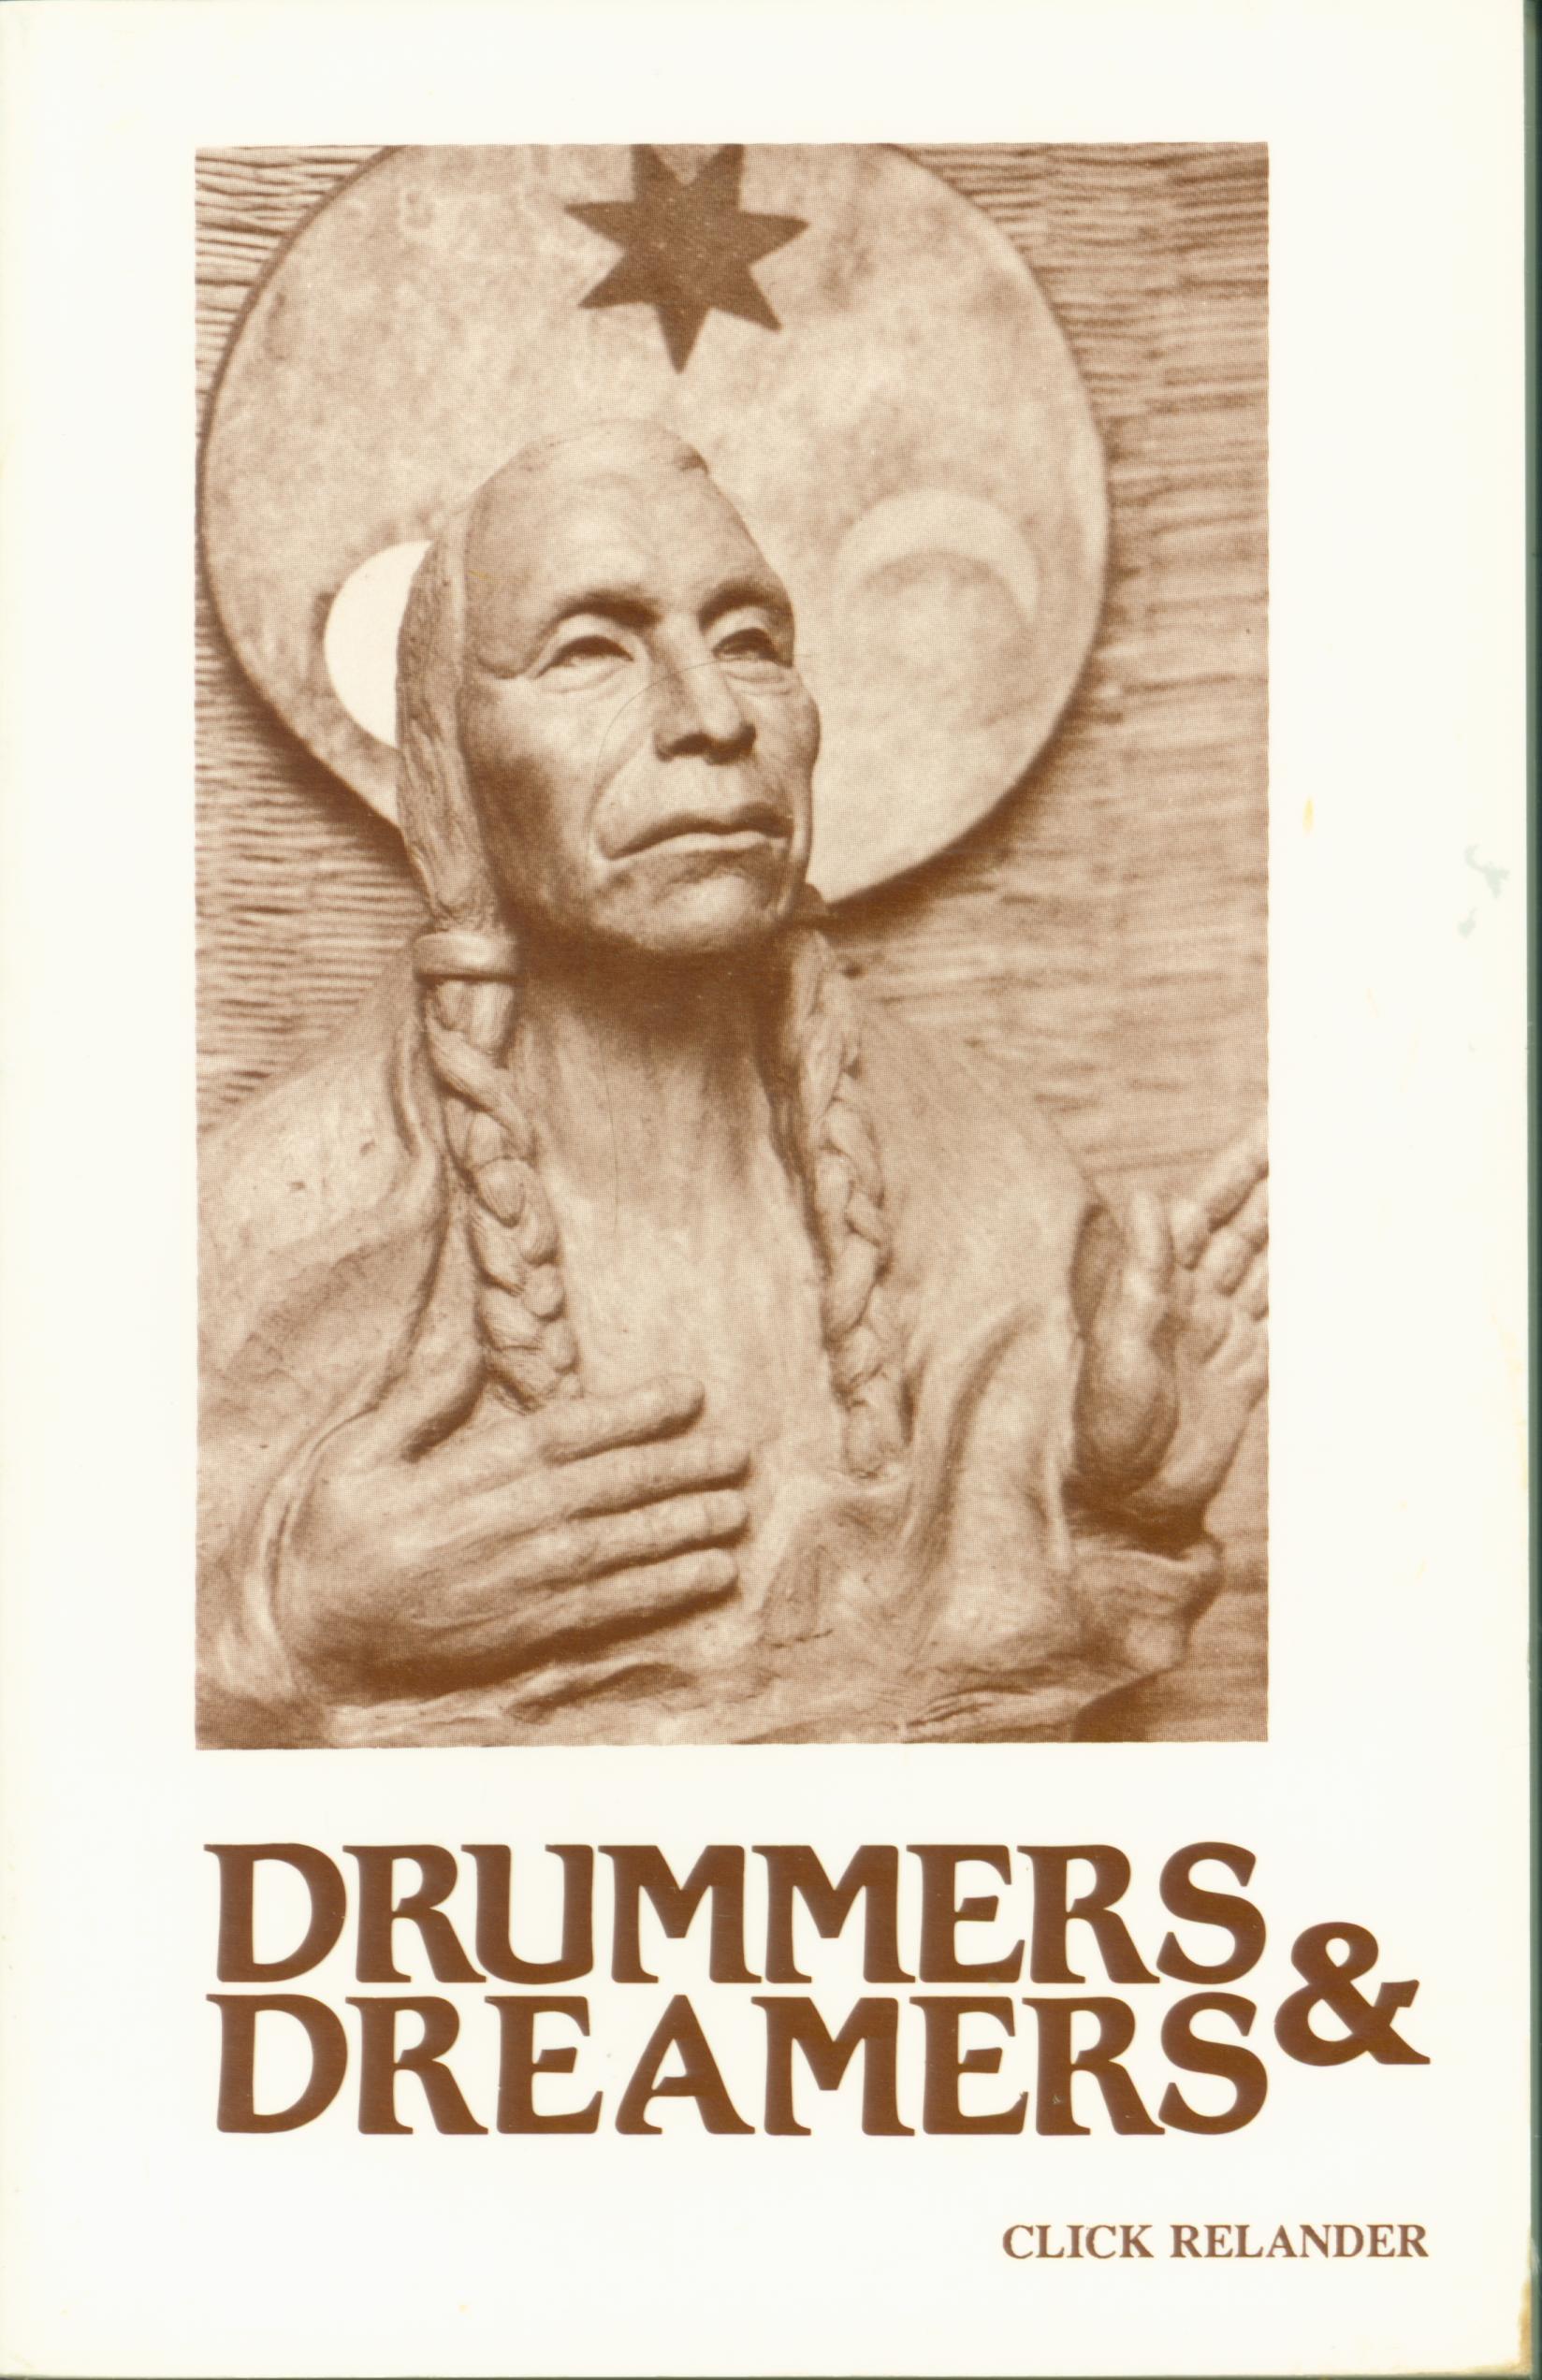 DRUMMERS AND DREAMERS. 